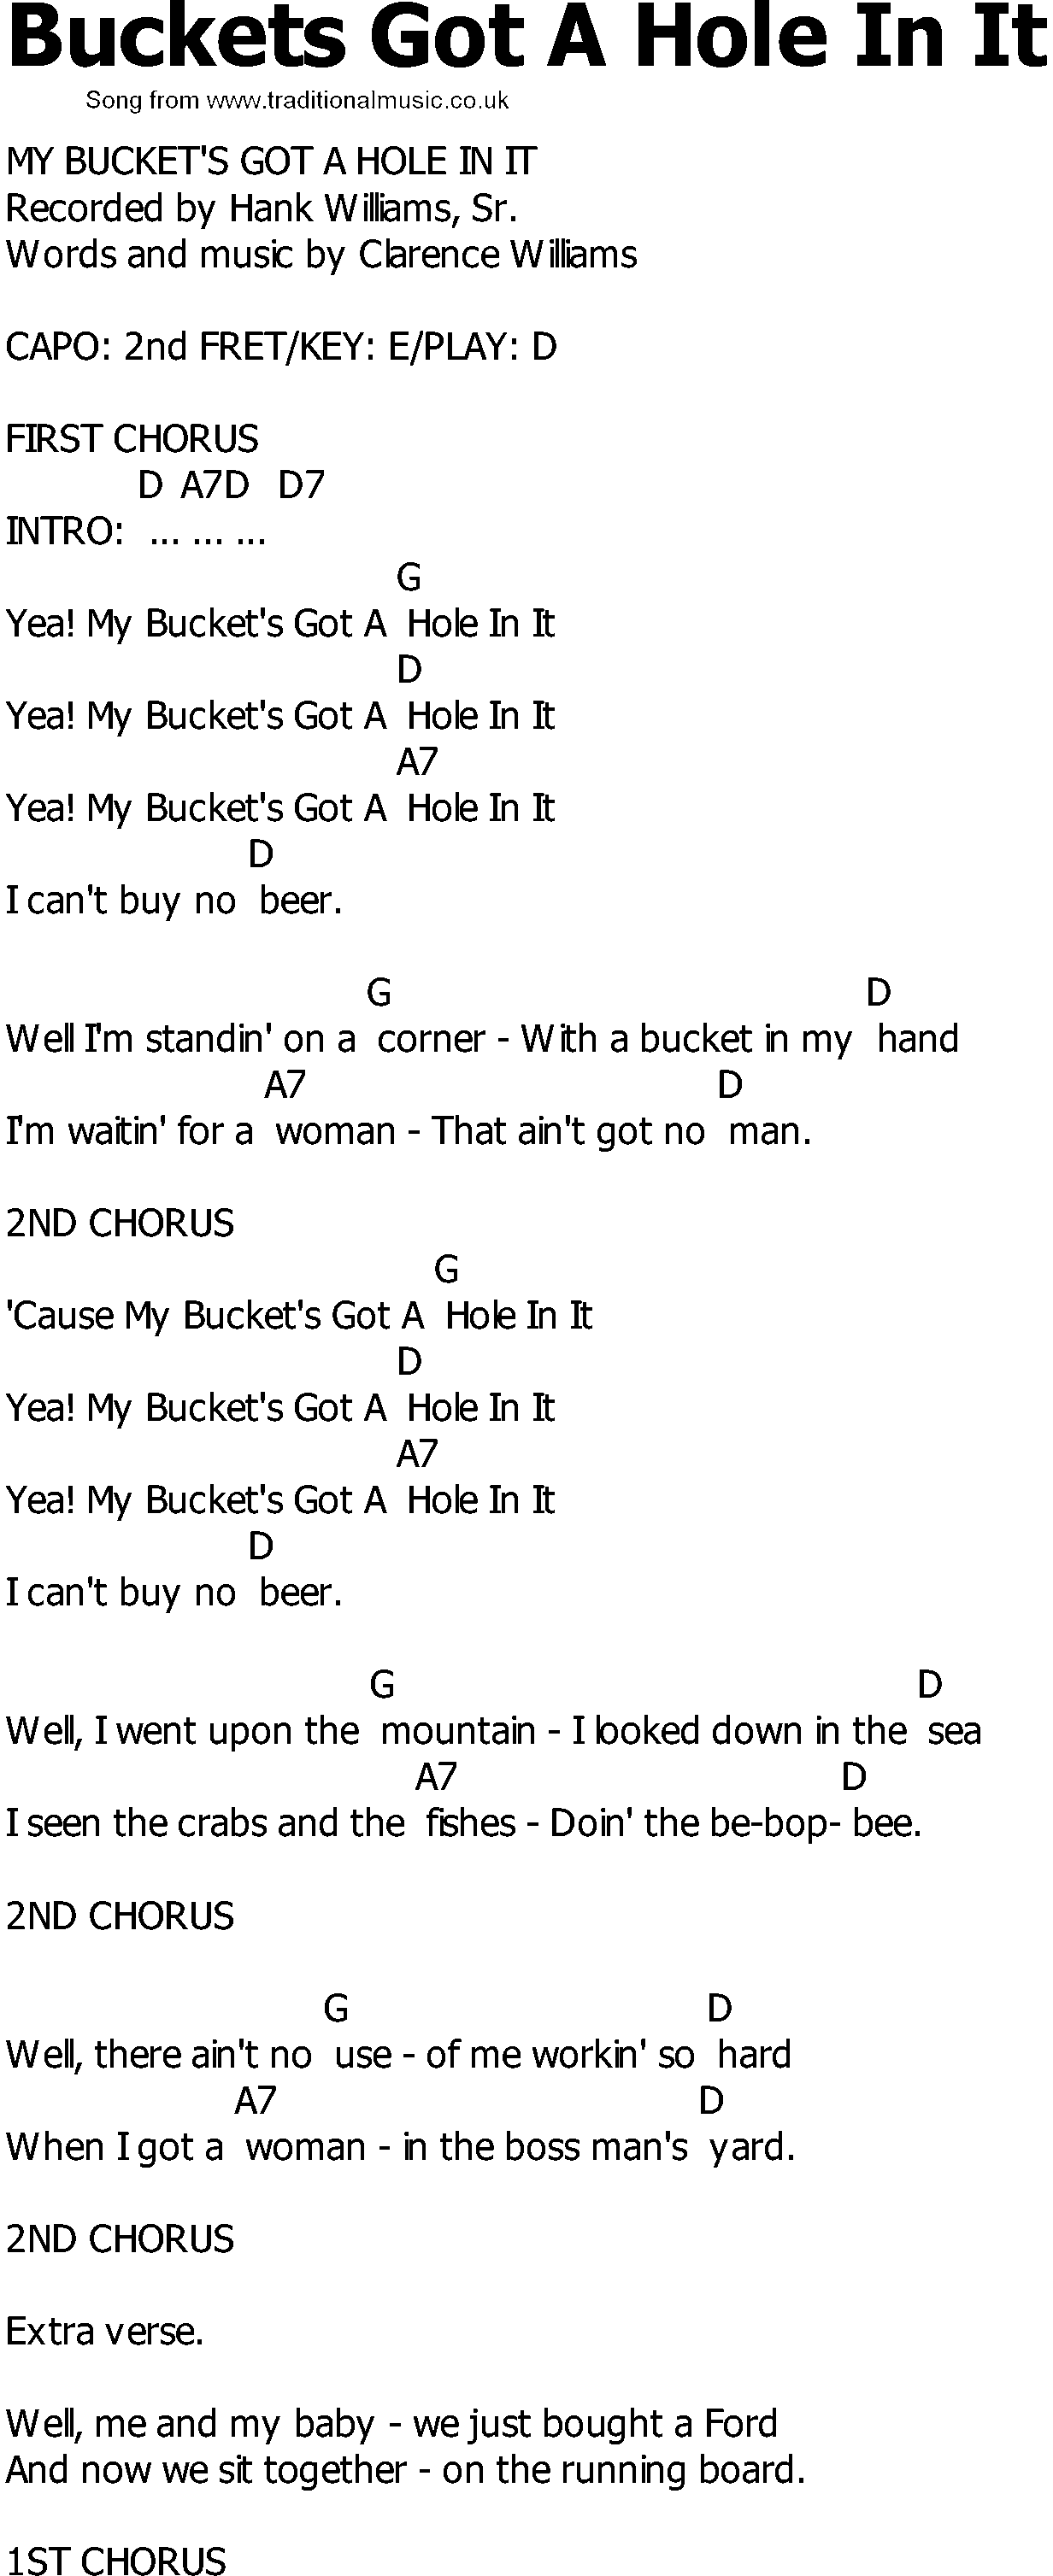 Old Country song lyrics with chords - Buckets Got A Hole In It